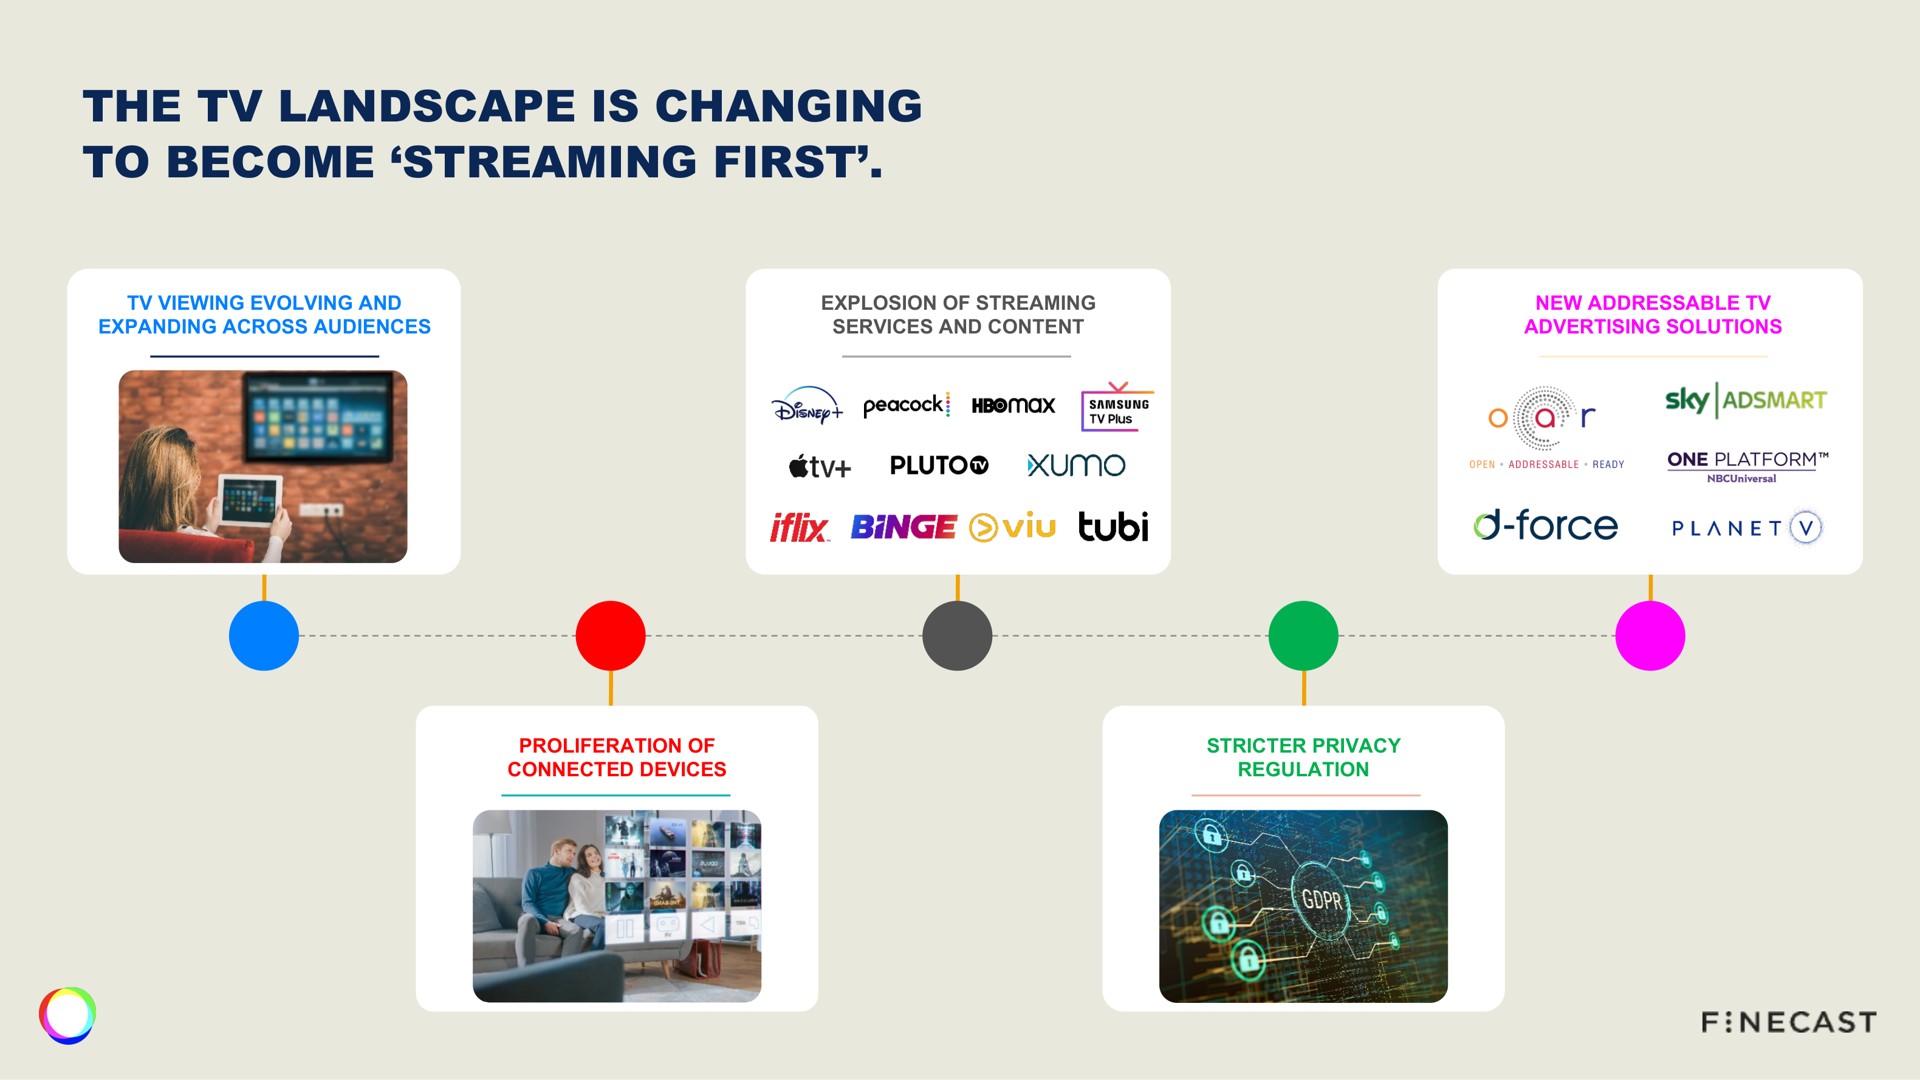 the landscape is changing to become streaming first | WPP